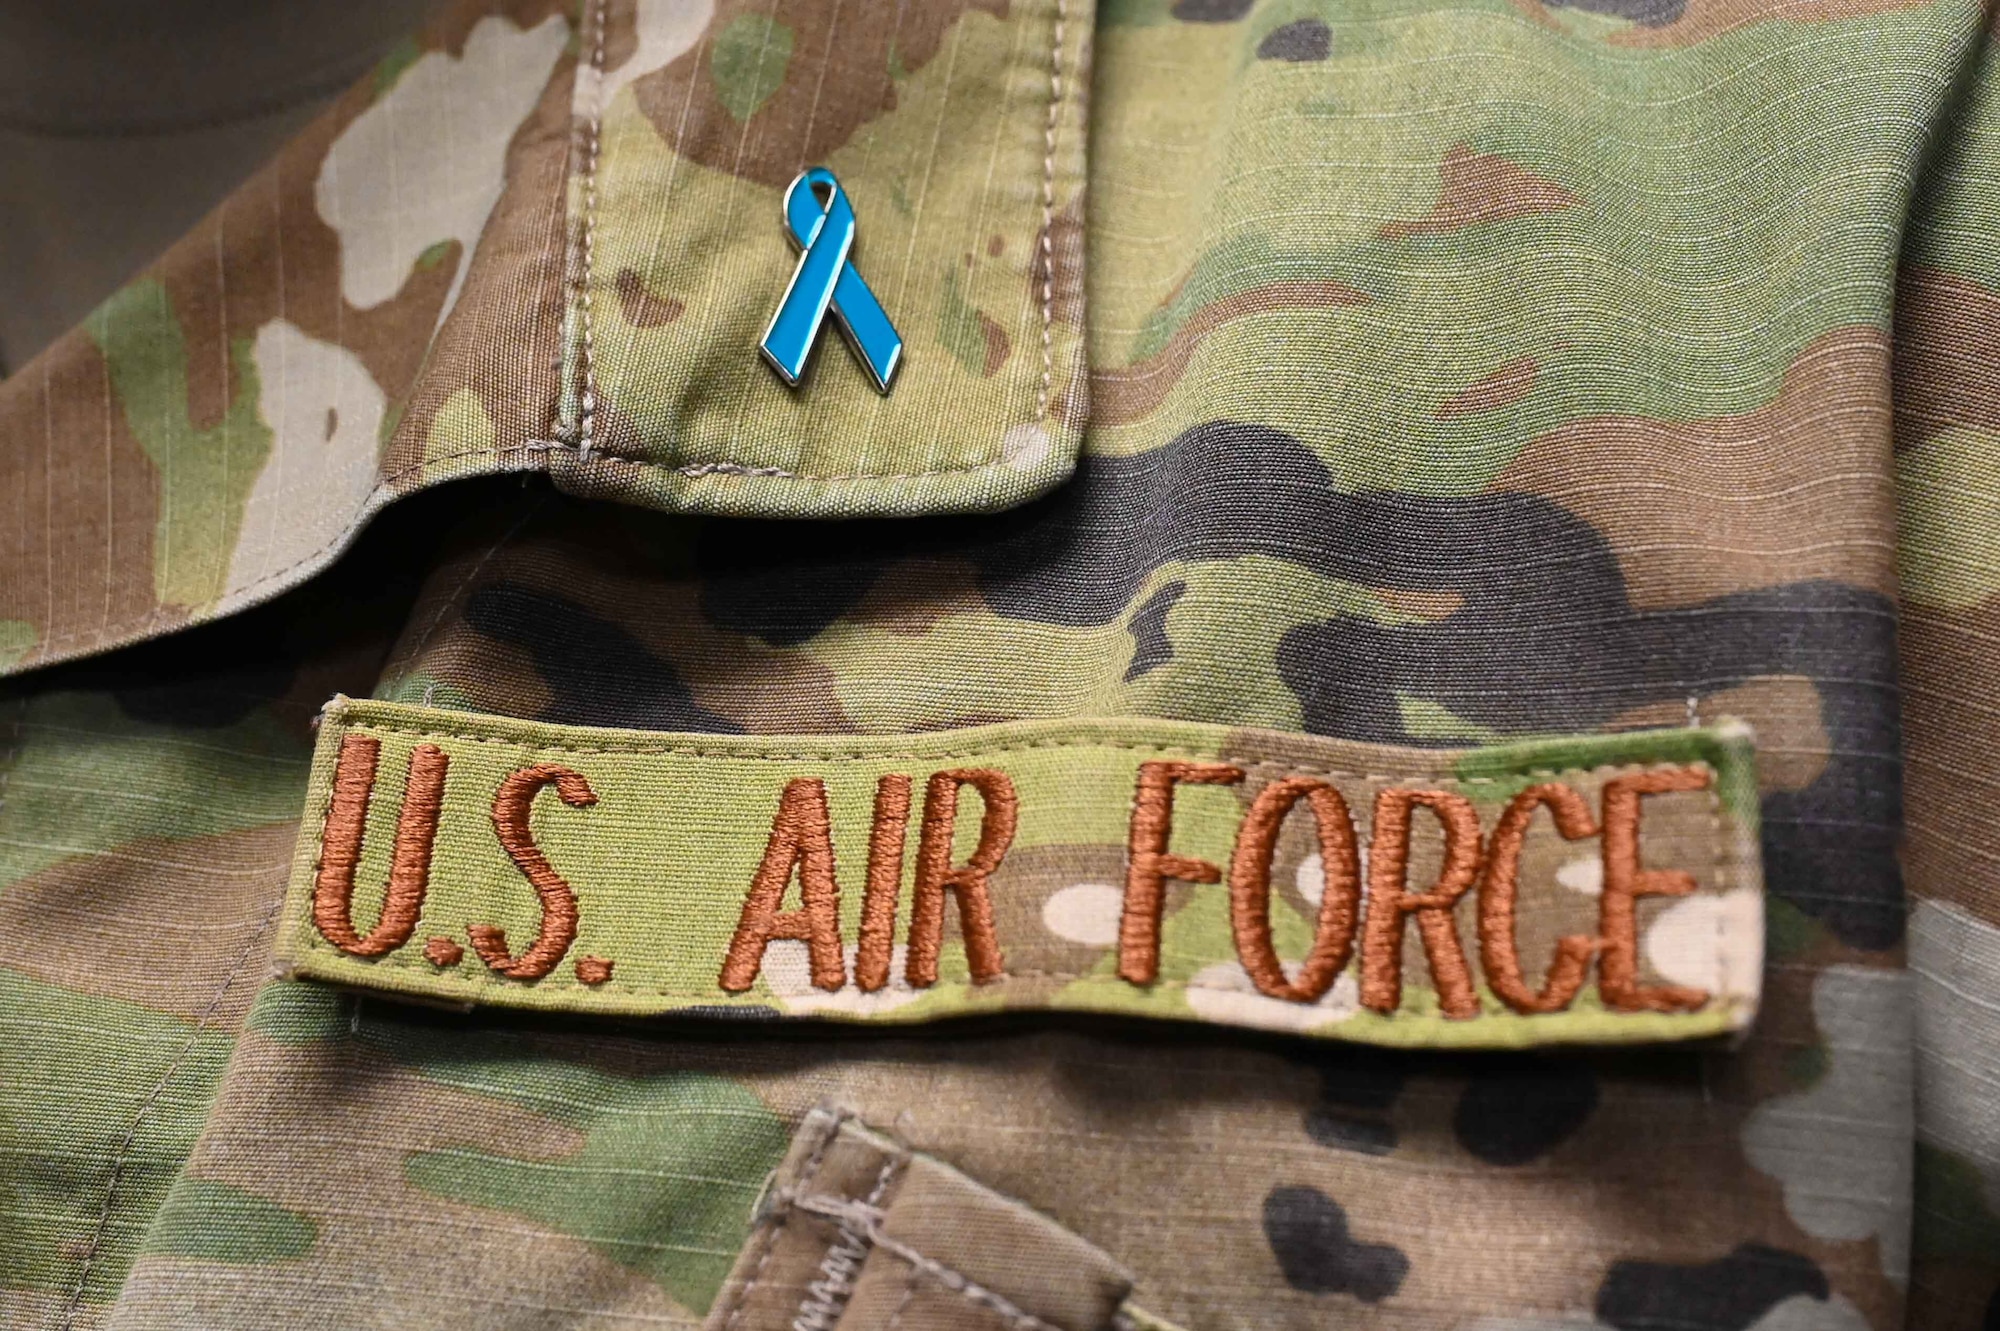 U.S. Air Force Master Sgt. Nathan Allen, 97th Air Mobility Wing public affairs superintendent, shows off the ribbon for “Teal Tuesdays” at Altus Air Force Base, Oklahoma, April 26, 2023. The ribbon is meant to bring awareness to sexual assault victims. (U.S. Air Force photo by Airman1st Class Kari Degraffenreed)